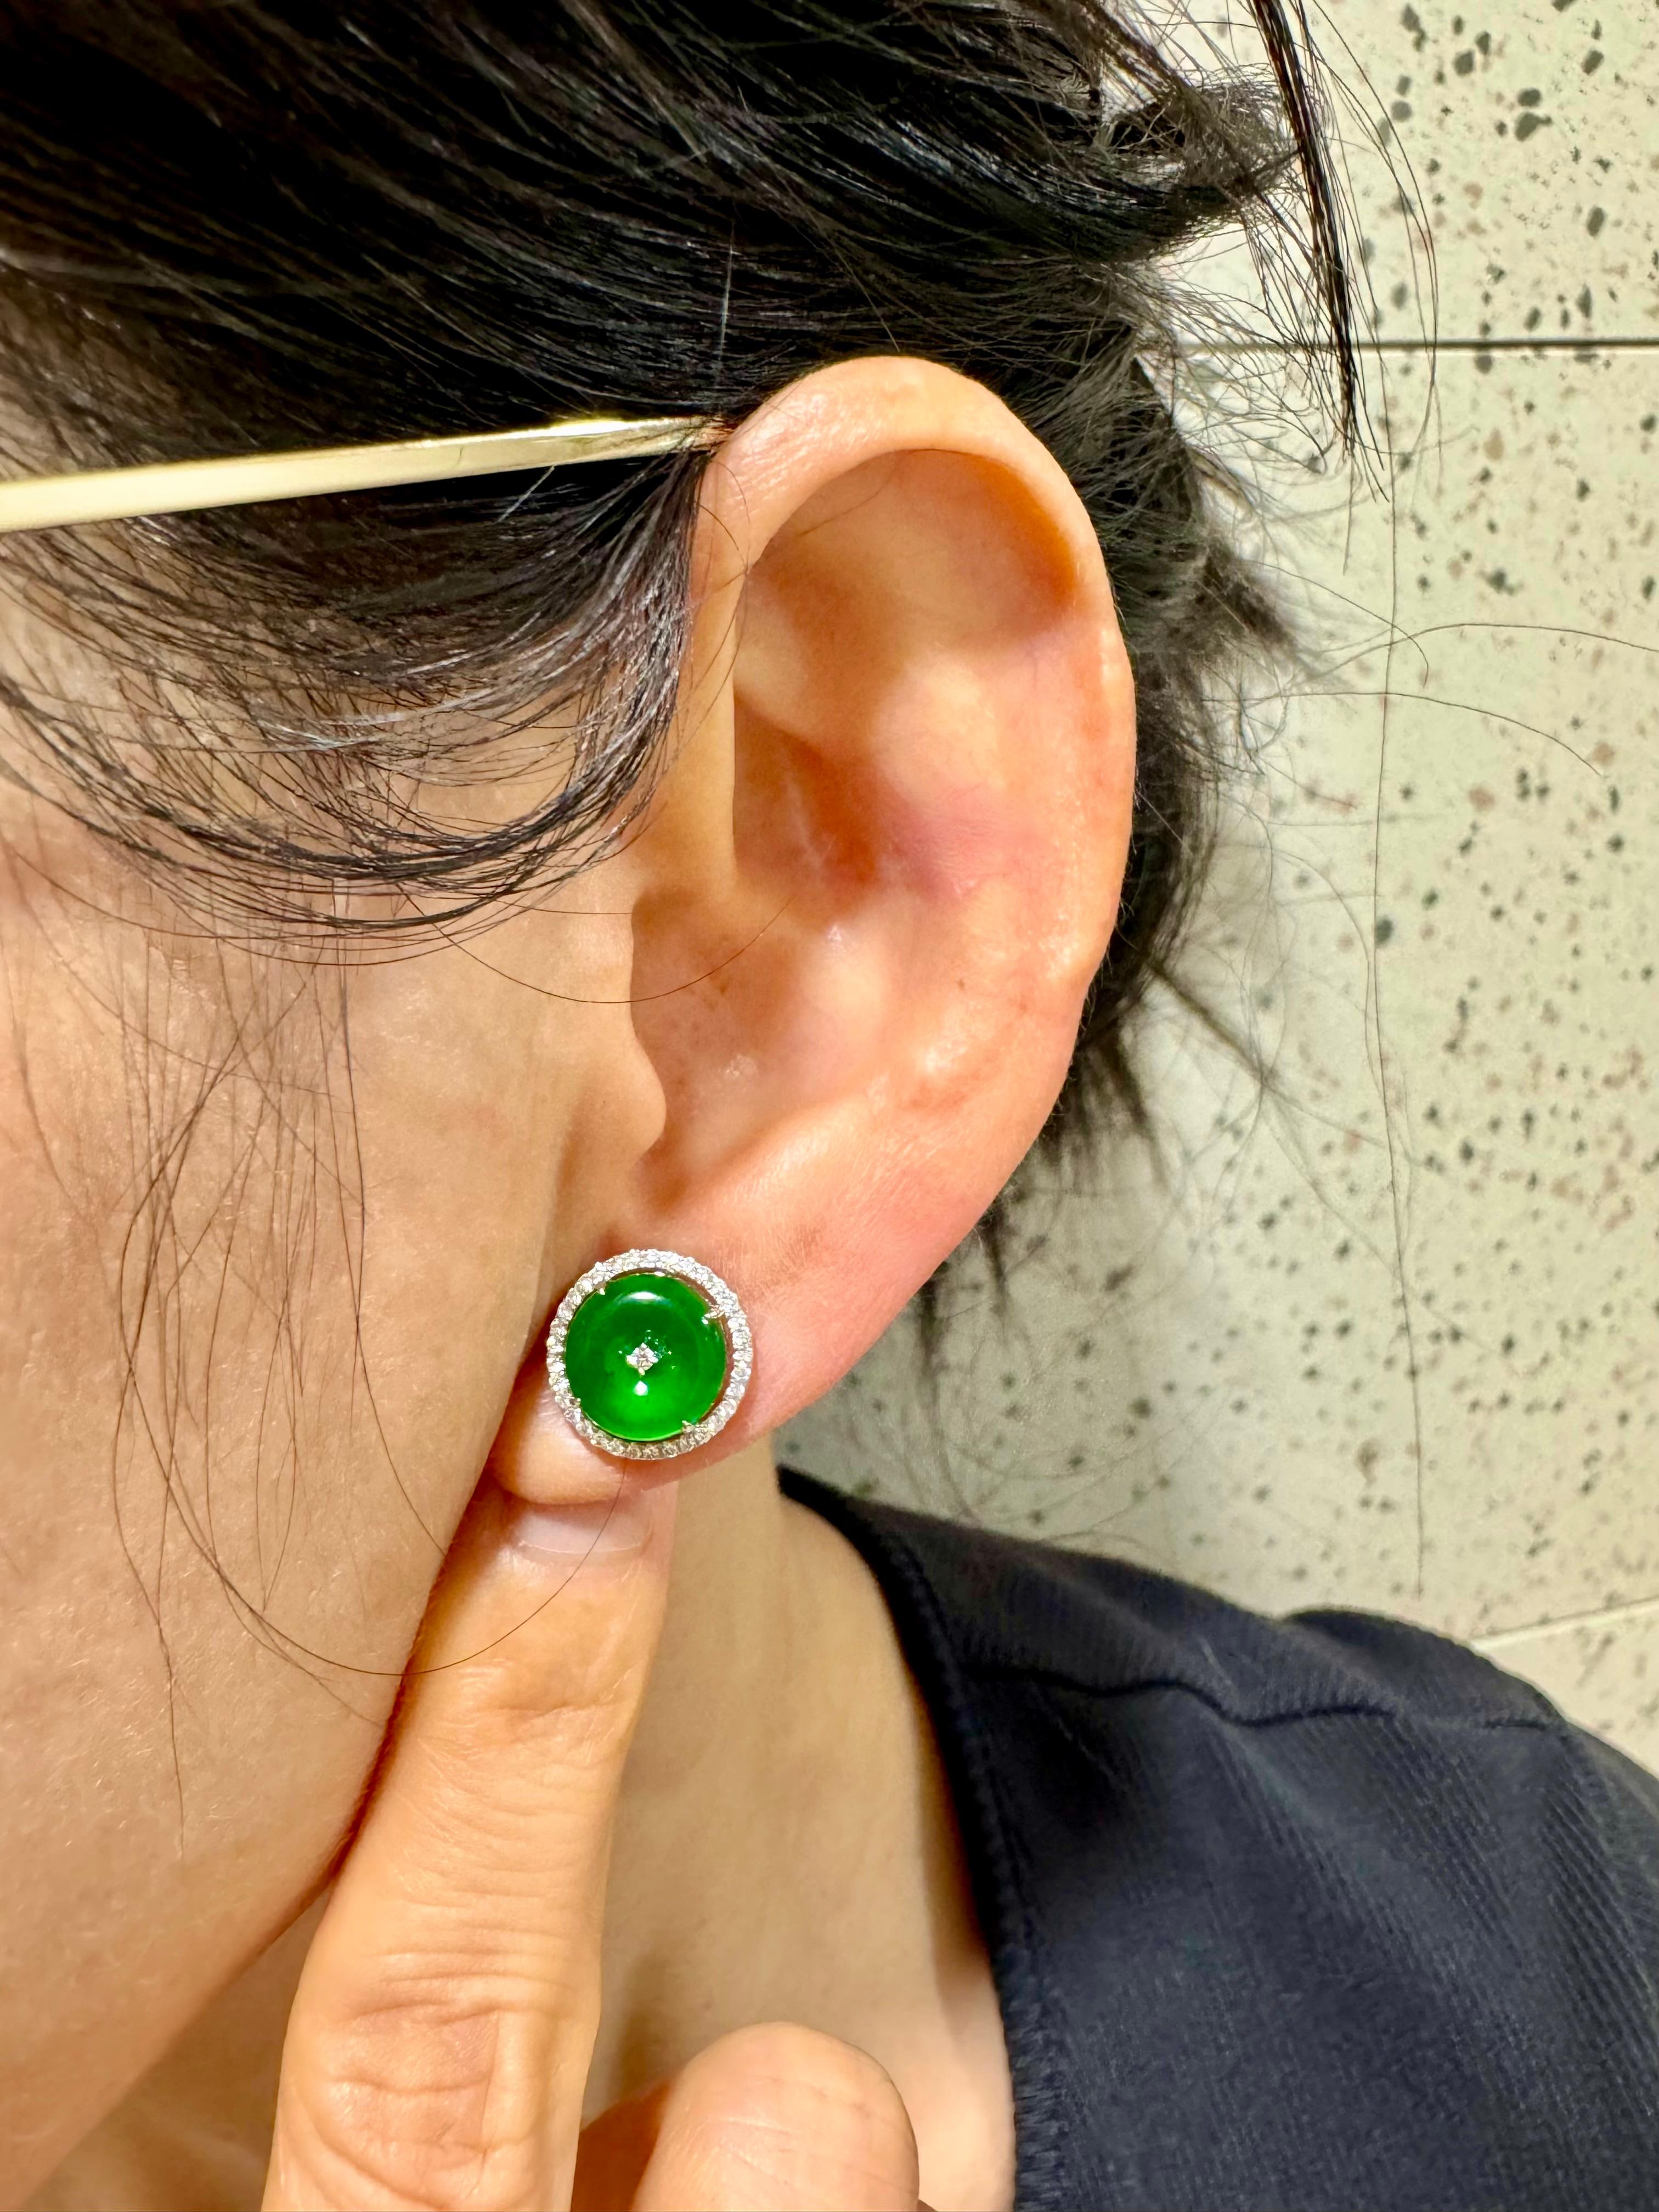 Please check out the HD video! Here is a nice pair of bright apple green Jade earrings. Each earring is about 12mm. The earrings are set in 18k white gold and diamonds. There are 2 diamonds in the middle totaling 0.02cts and an additional 67 white